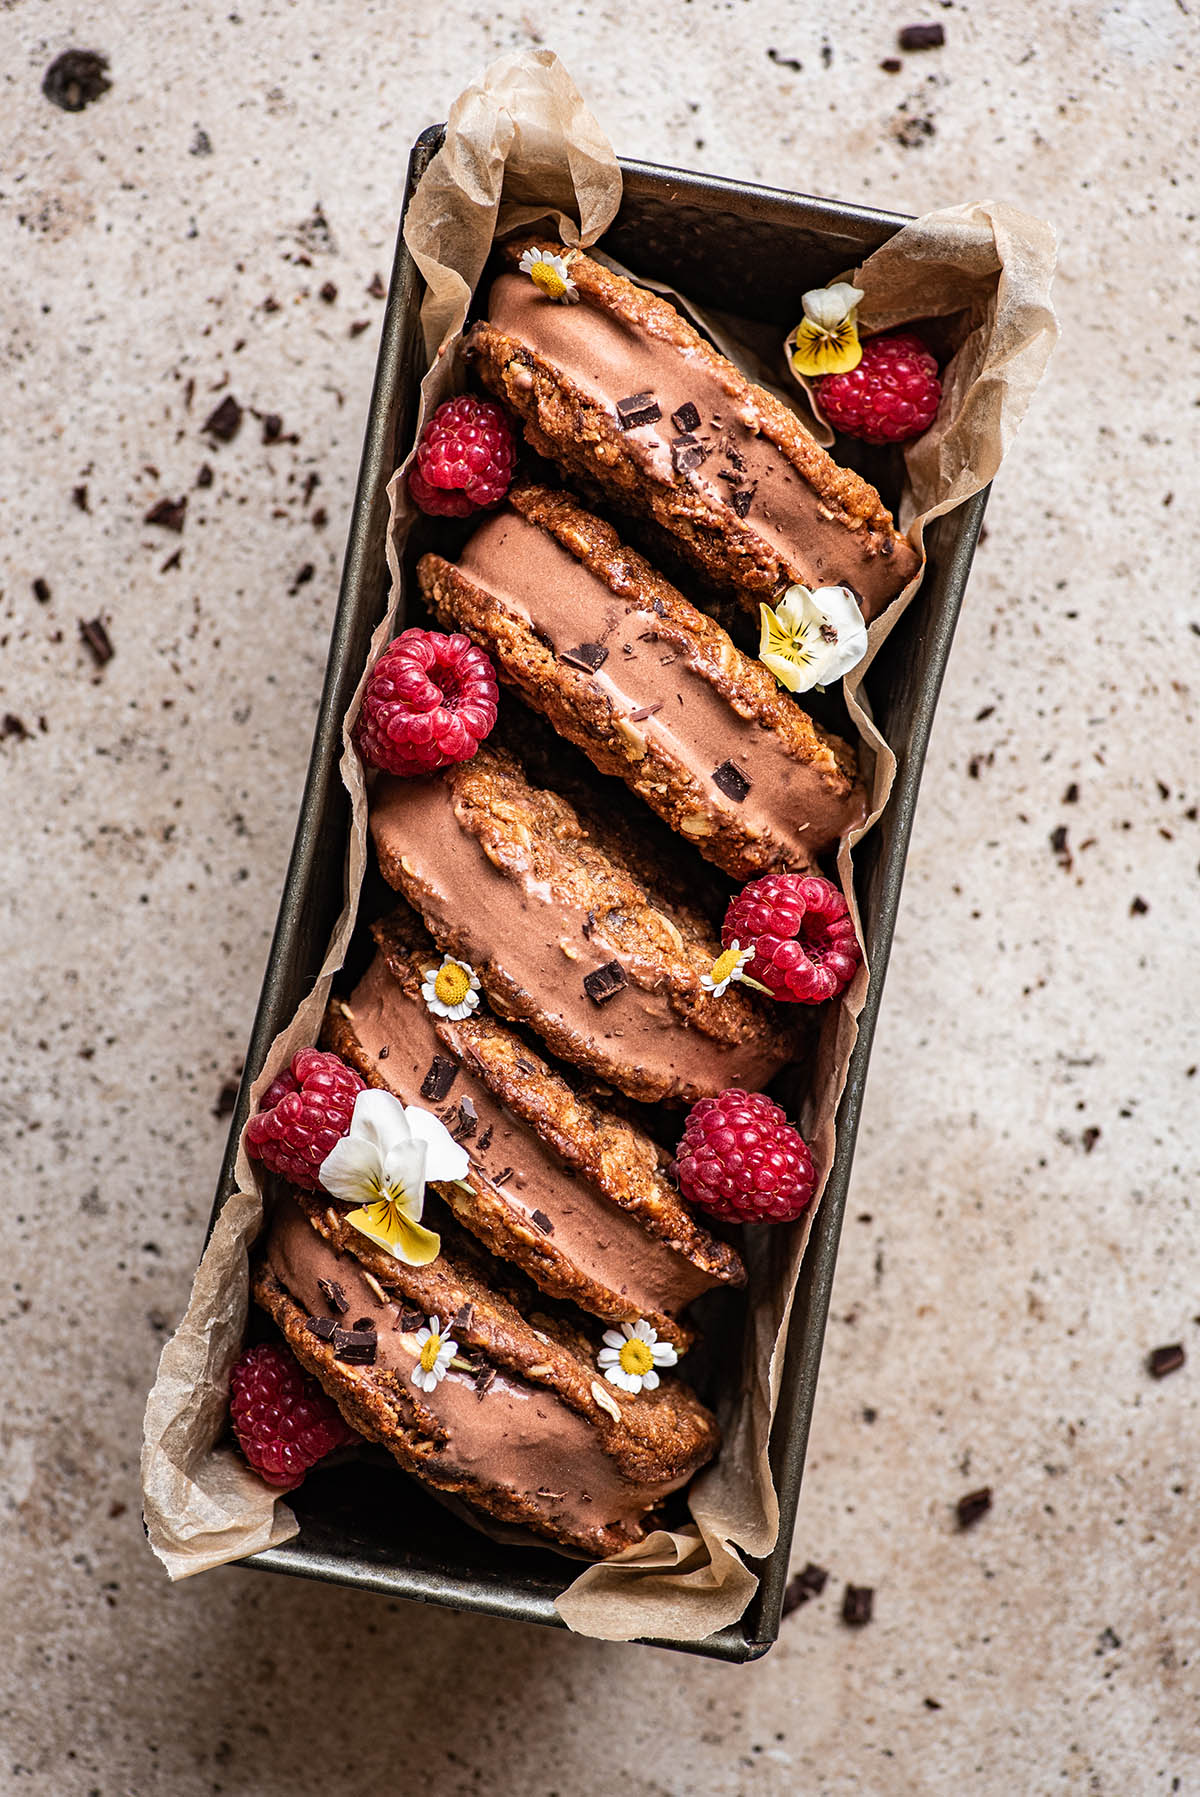 Five chocolate ice cream sandwiches lined up in a bread tin, decorated with raspberries and flowers.